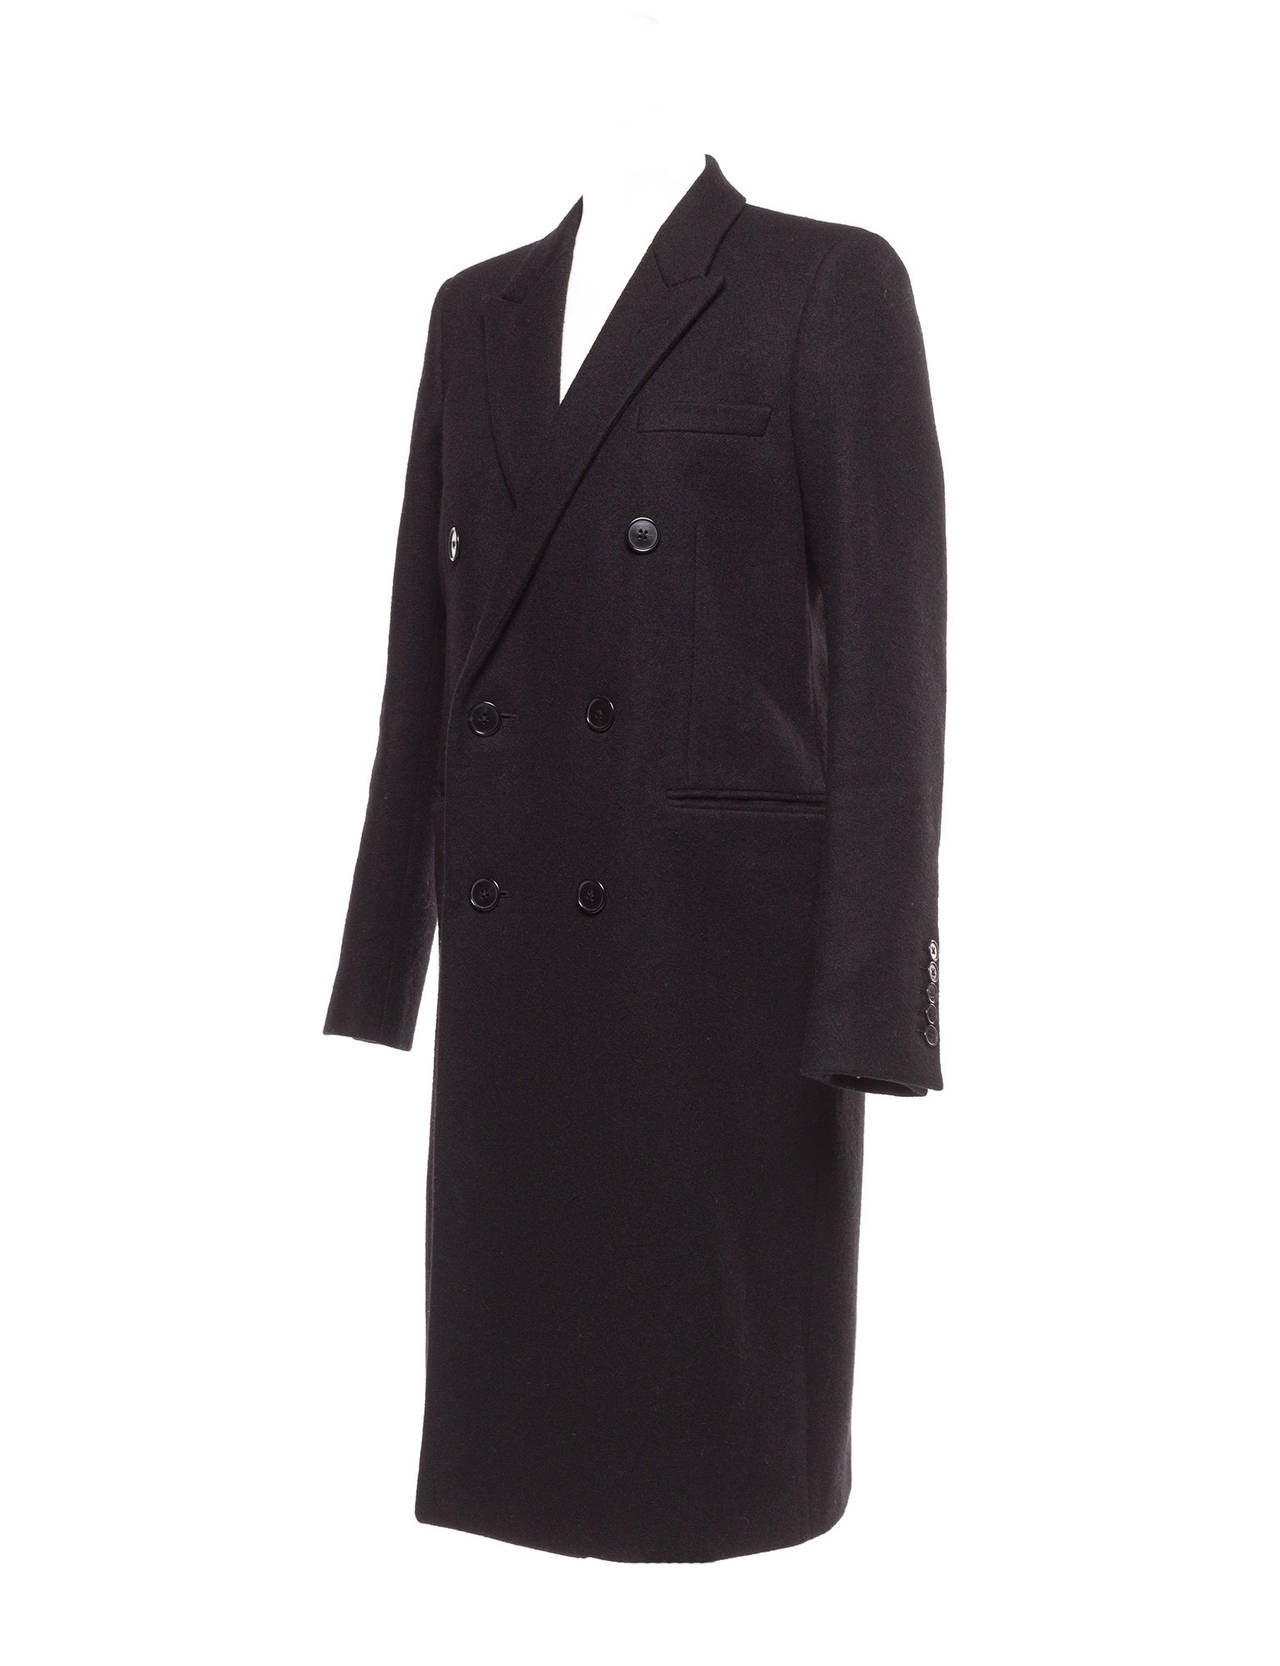 Coat has notched lapel collar detail and is cut with the slimane tailored precision that he is known for, Coat is 3/4 length and fully lined. Possibly from Fall 2013